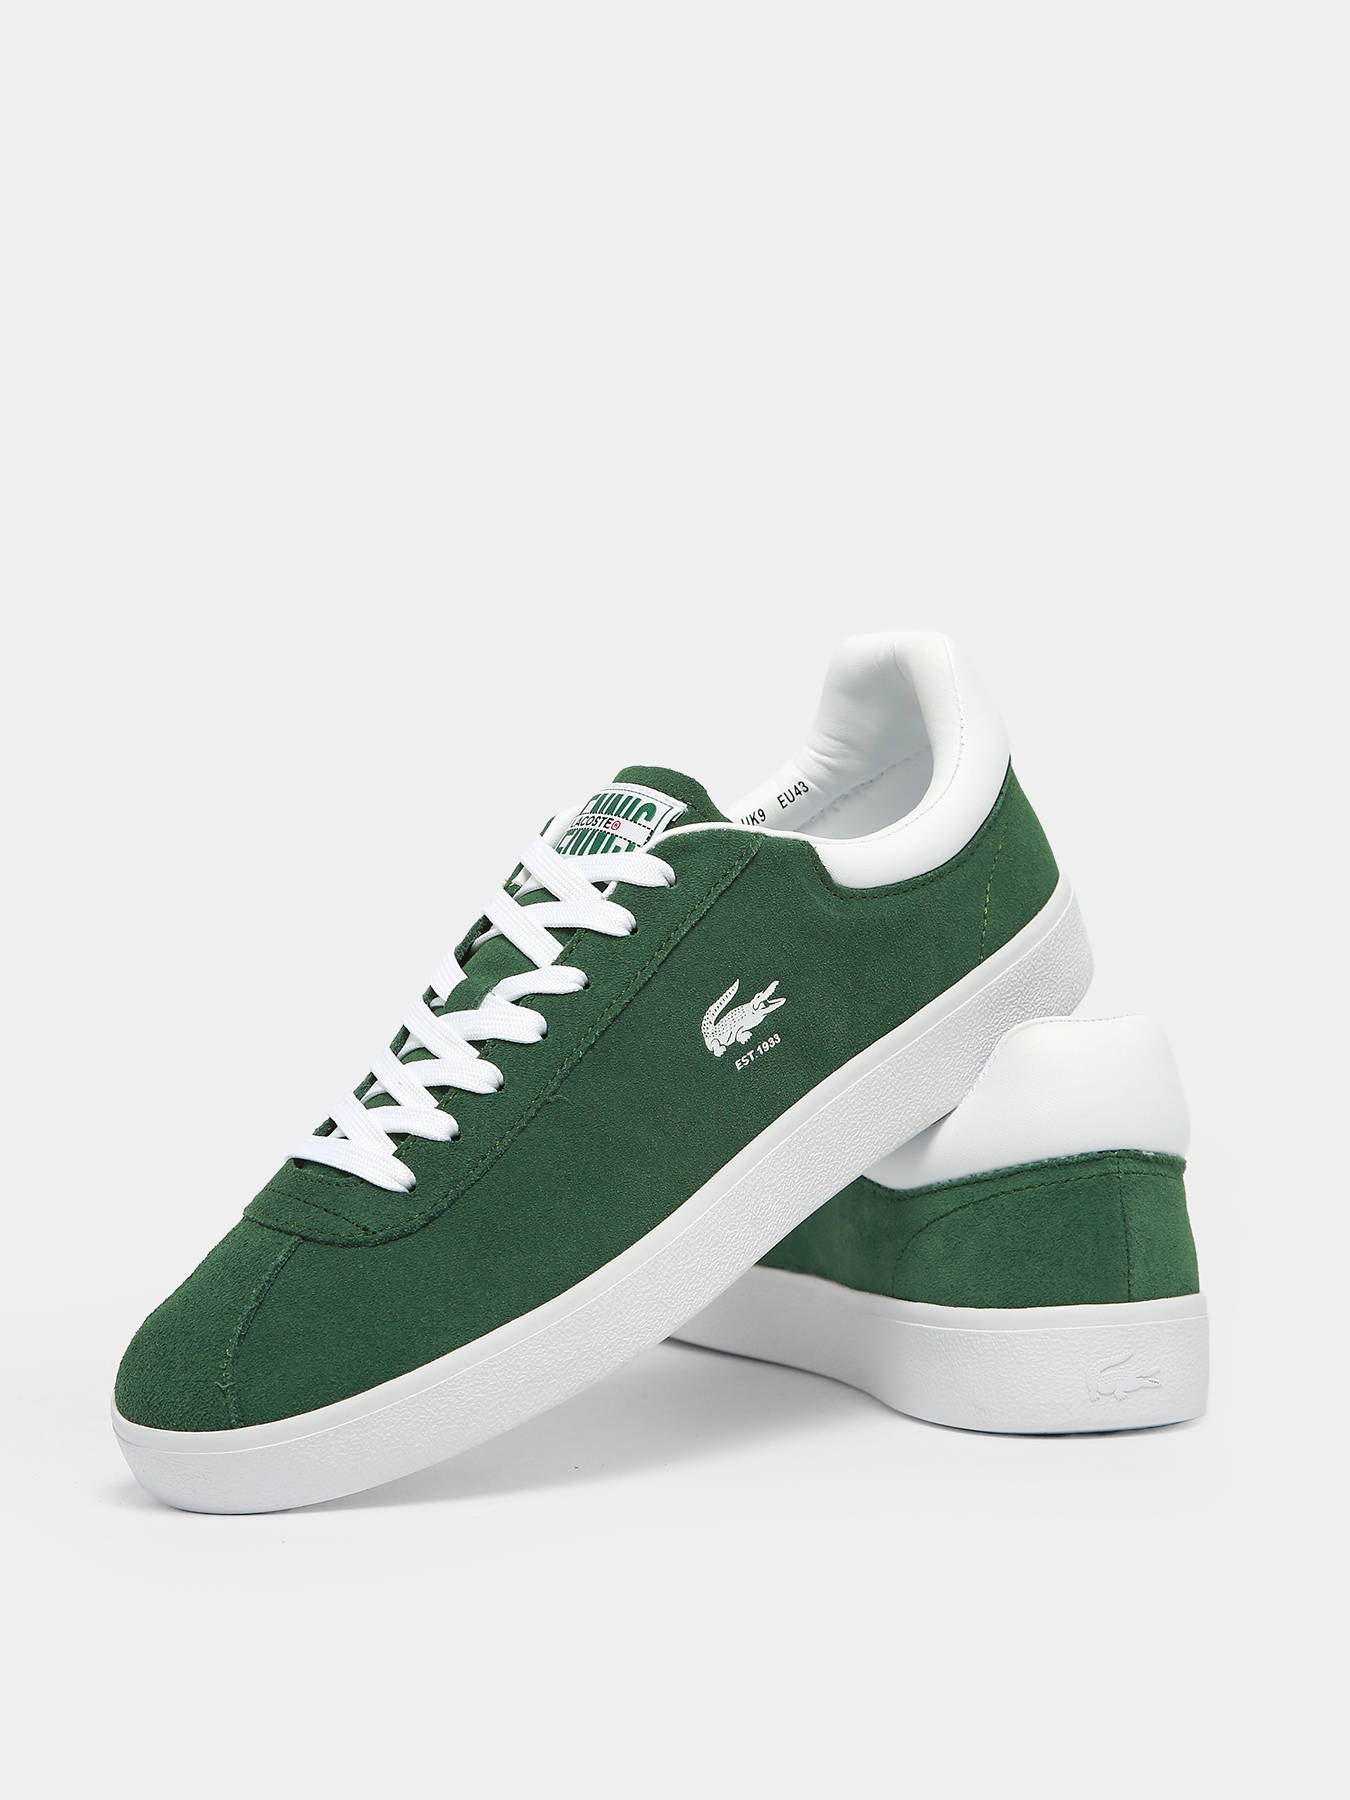 Men's Lacoste Powercourt Leather Casual Shoes| JD Sports